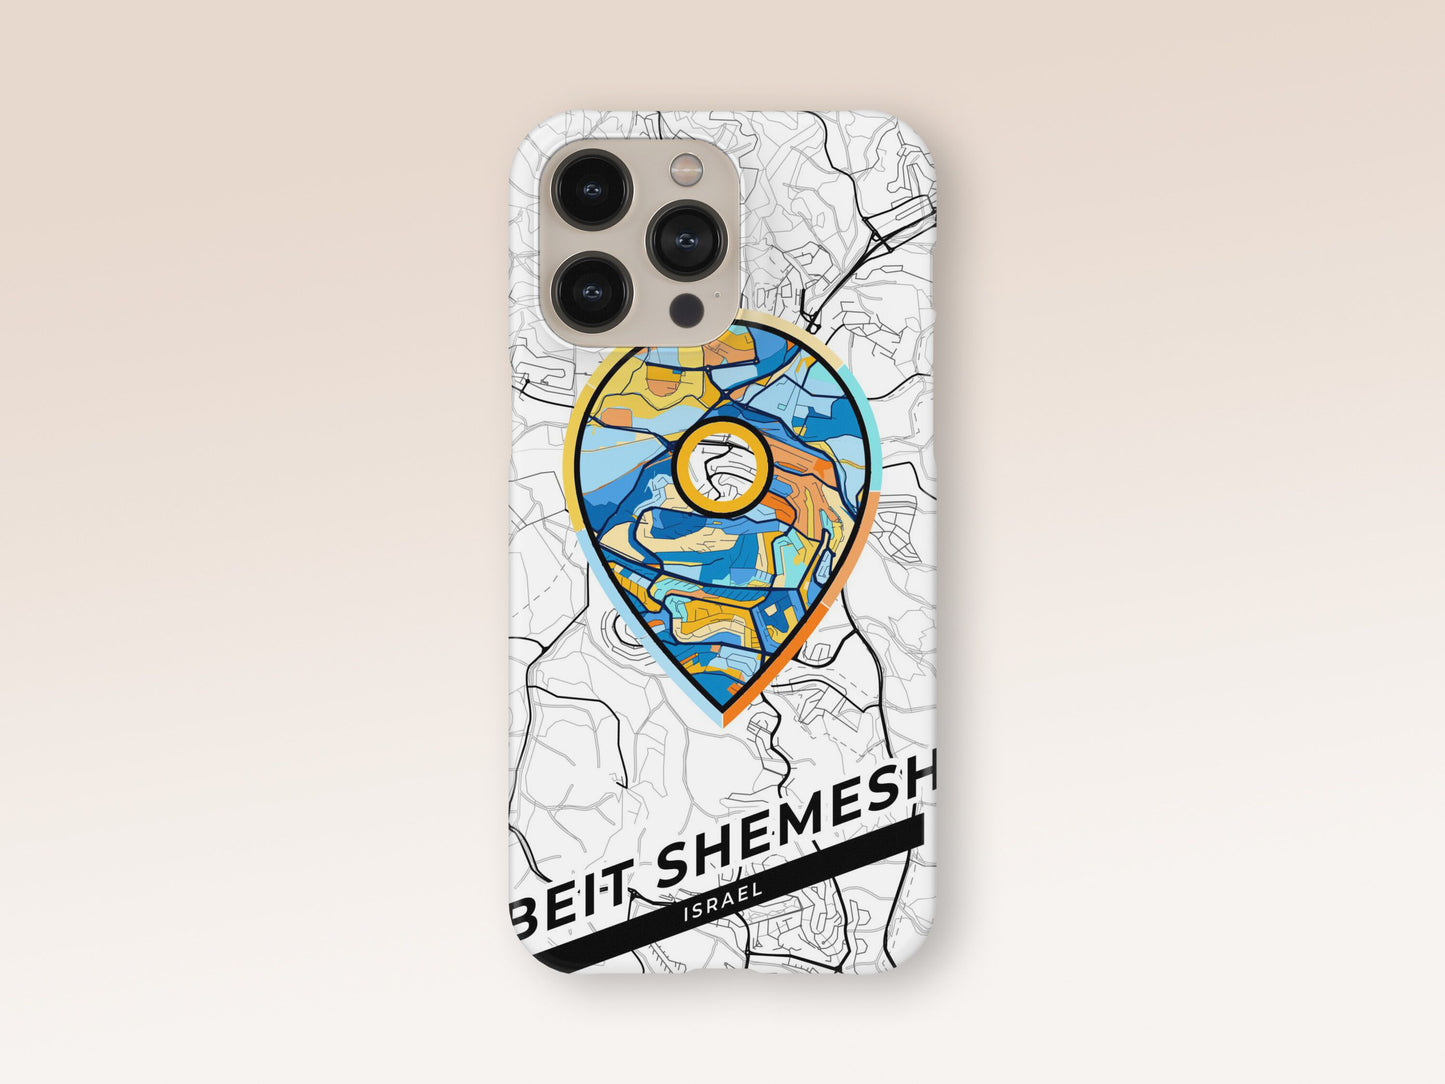 Beit Shemesh Israel slim phone case with colorful icon. Birthday, wedding or housewarming gift. Couple match cases. 1